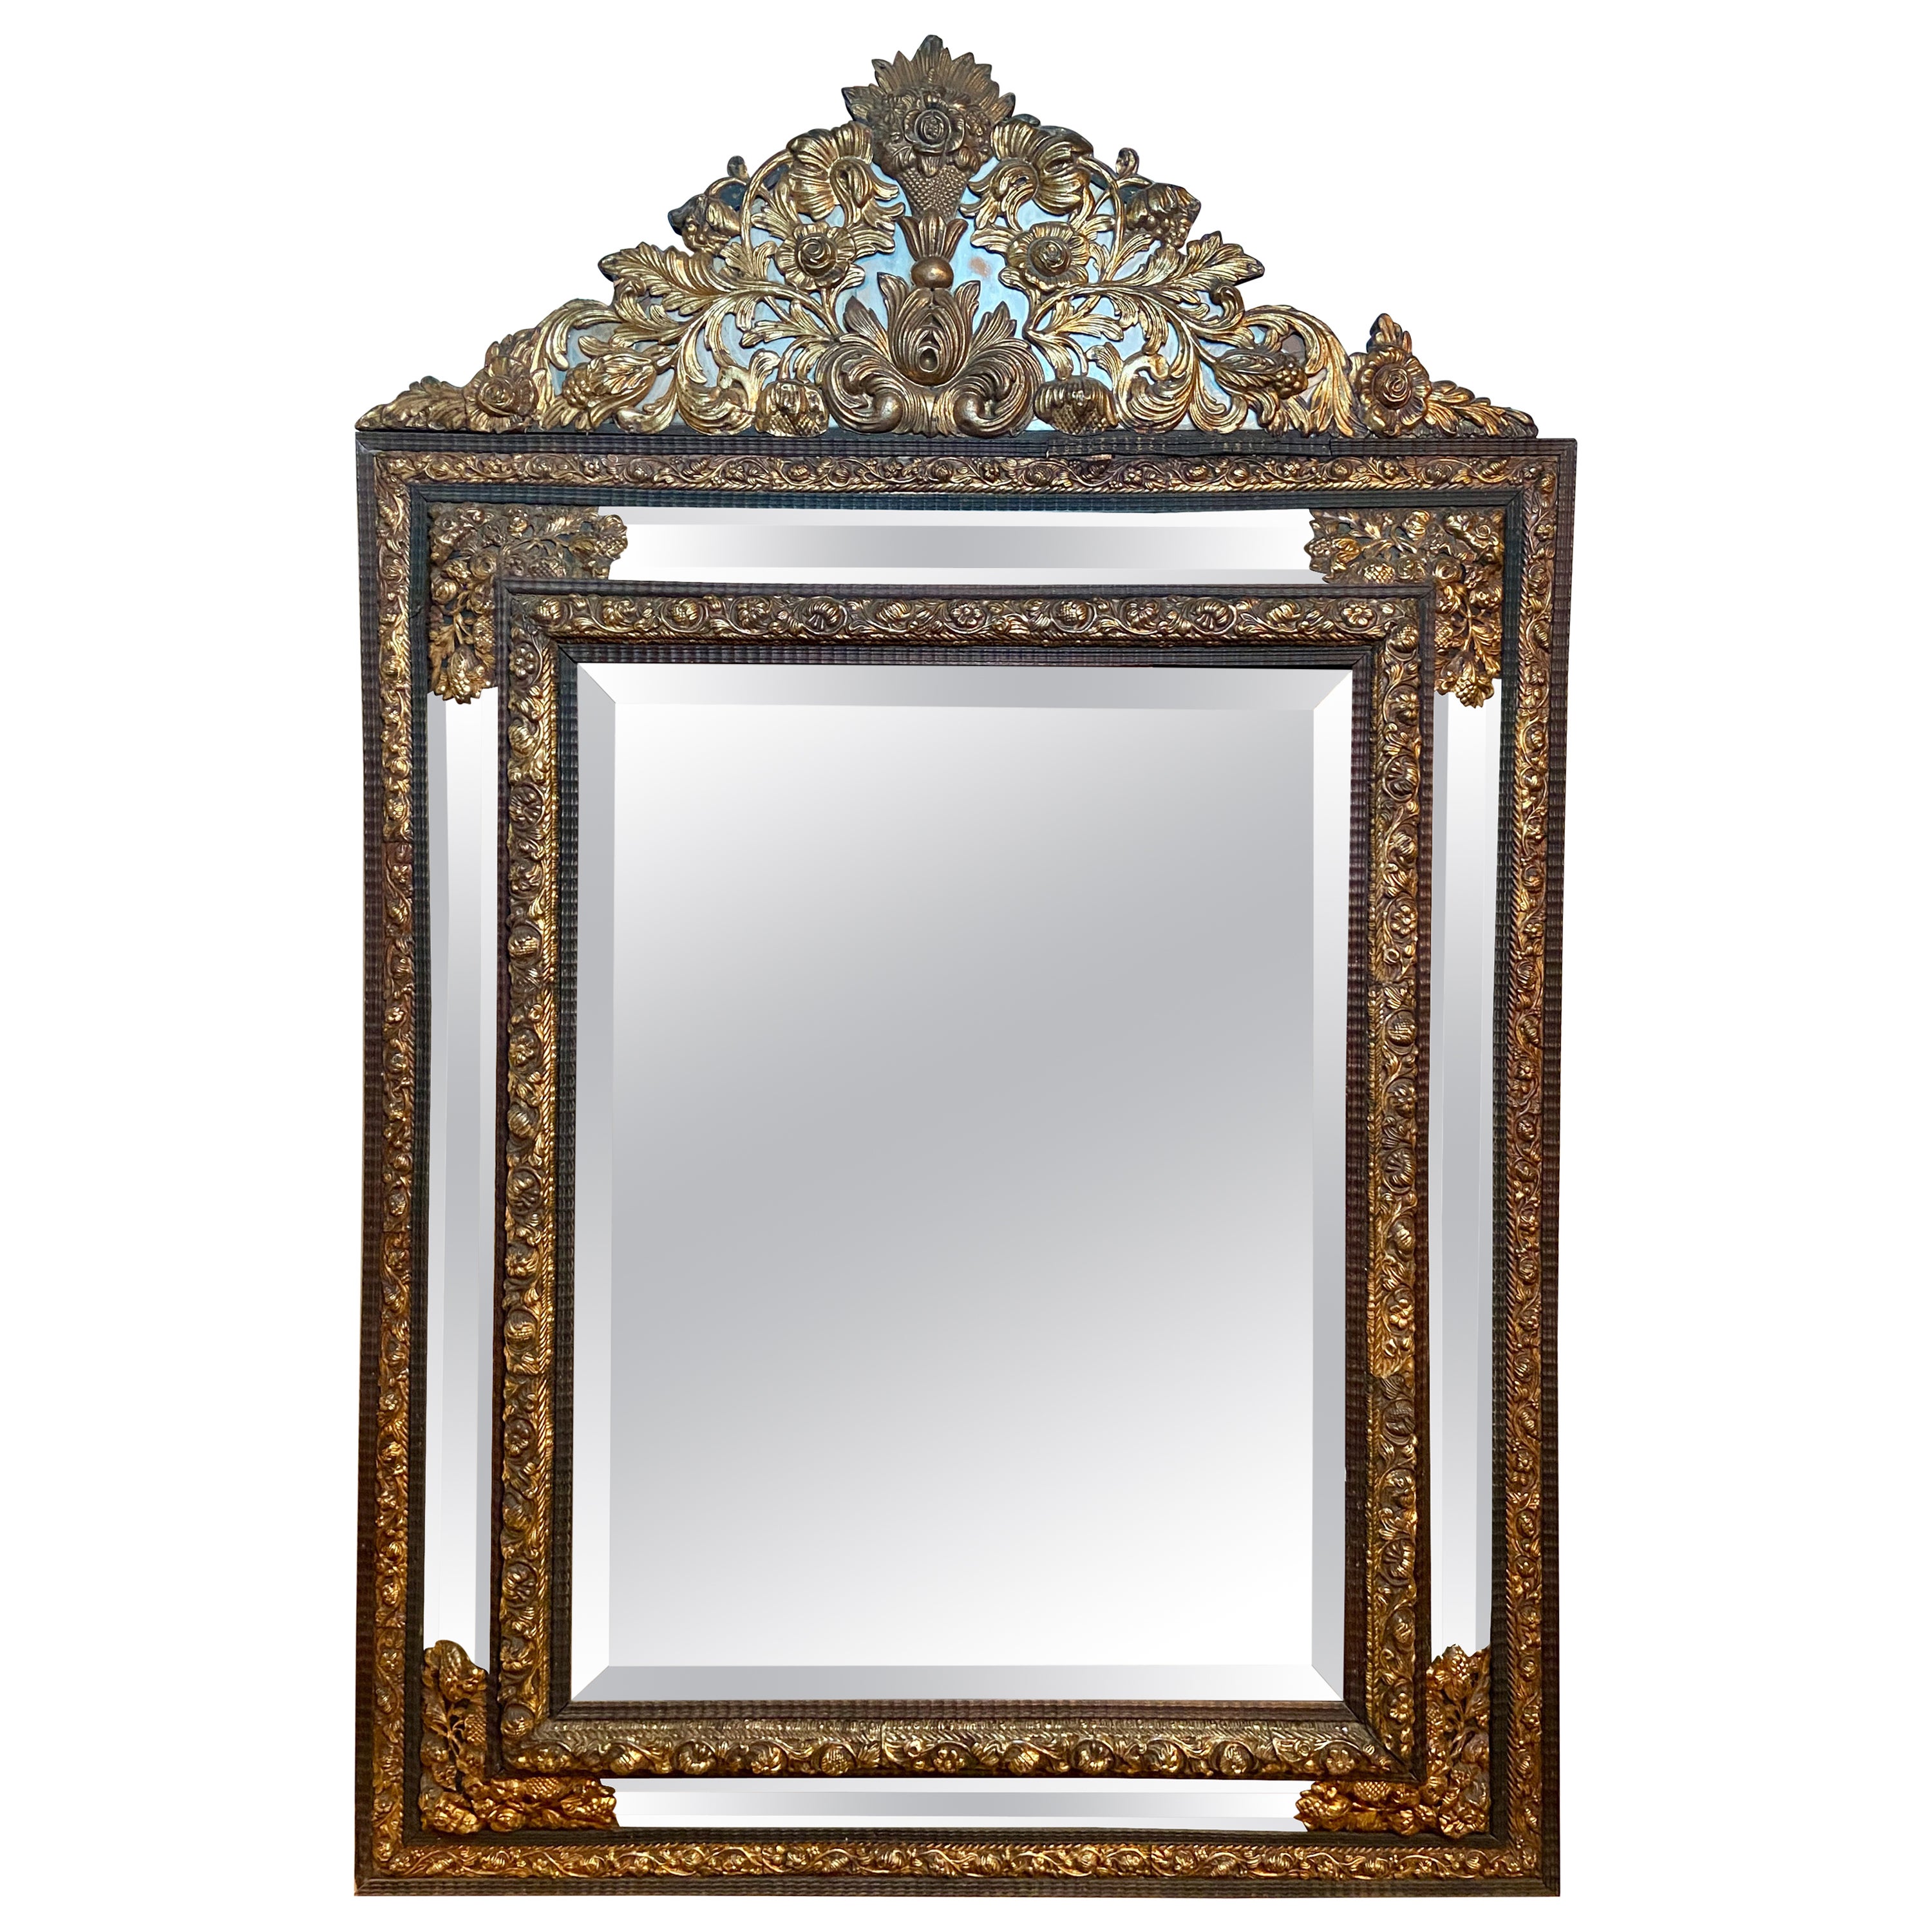 Antique French Brass Repoussé Paneled Mirror with Beveling, Circa 1860